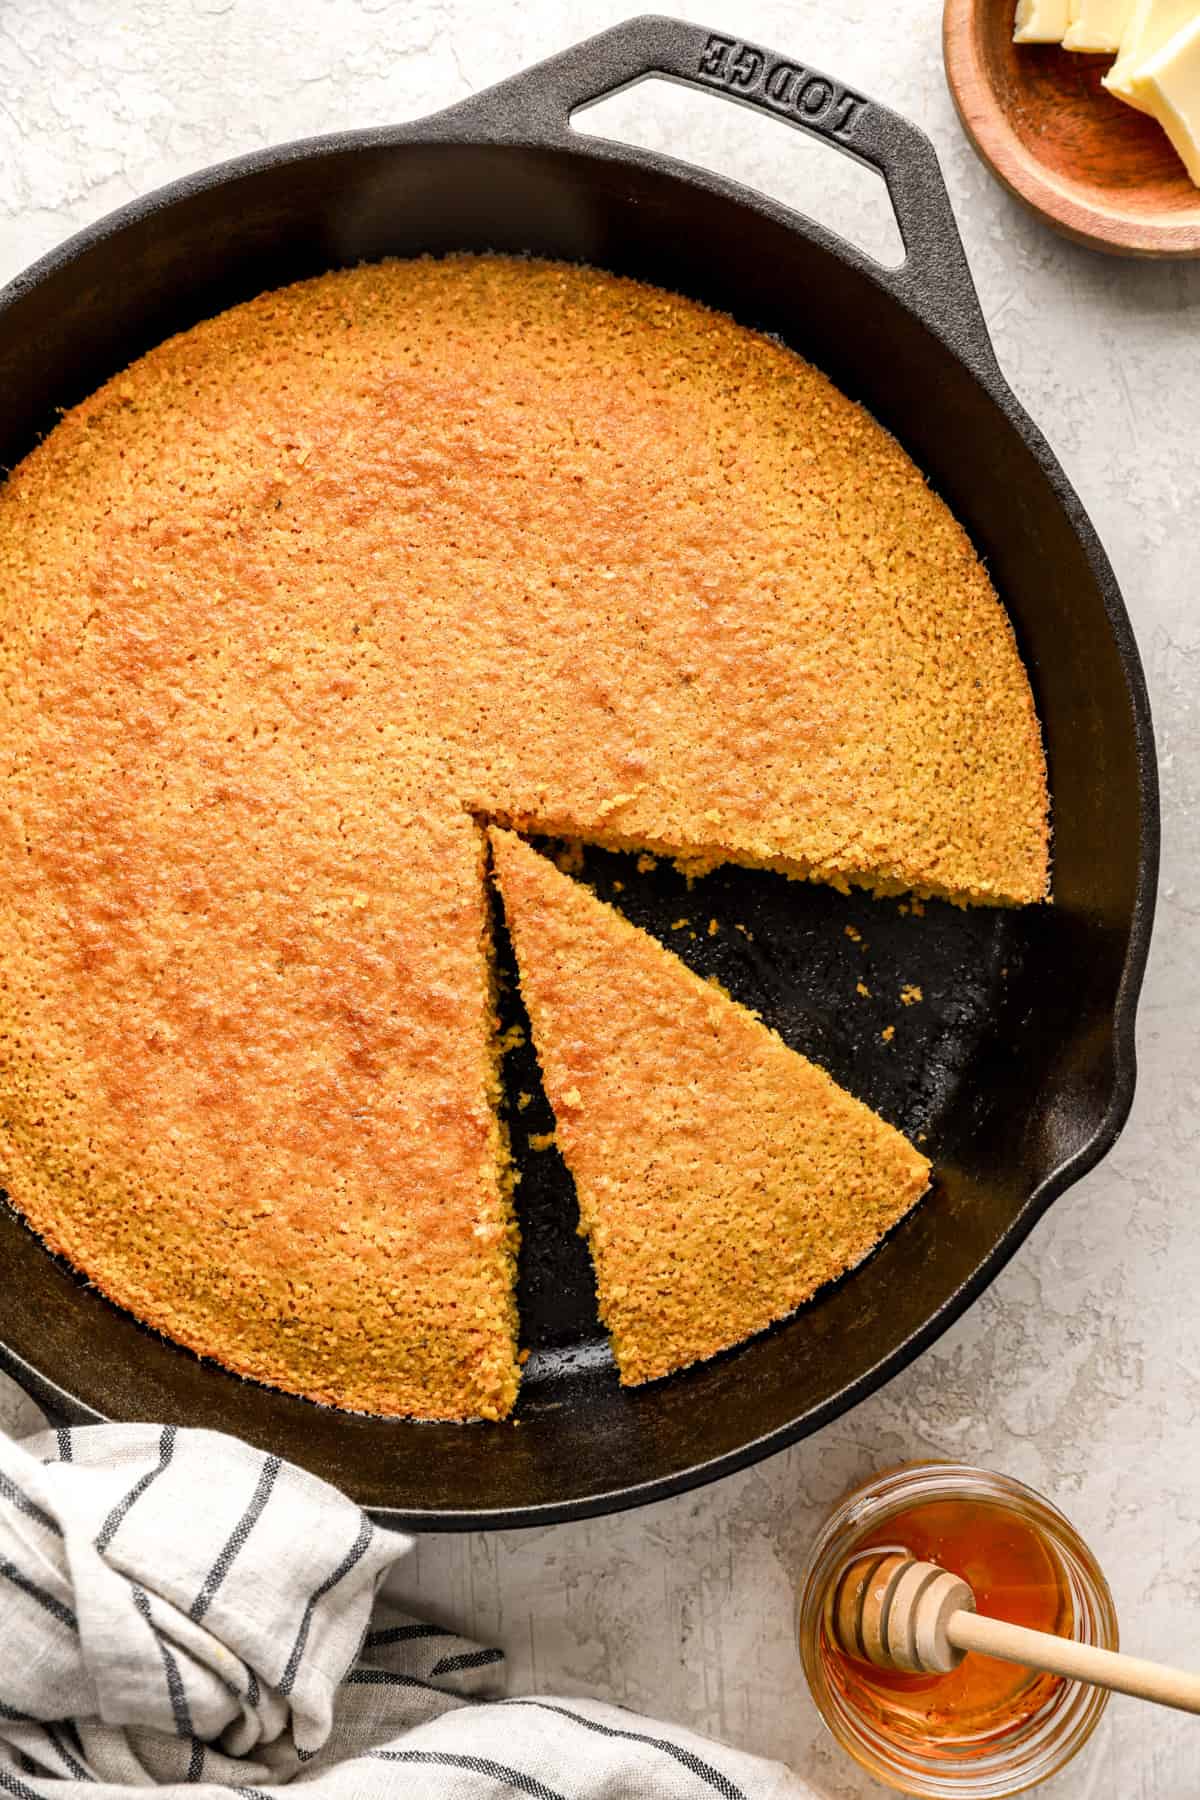 cornbread with a slice cut out in a cast iron skillet from above.